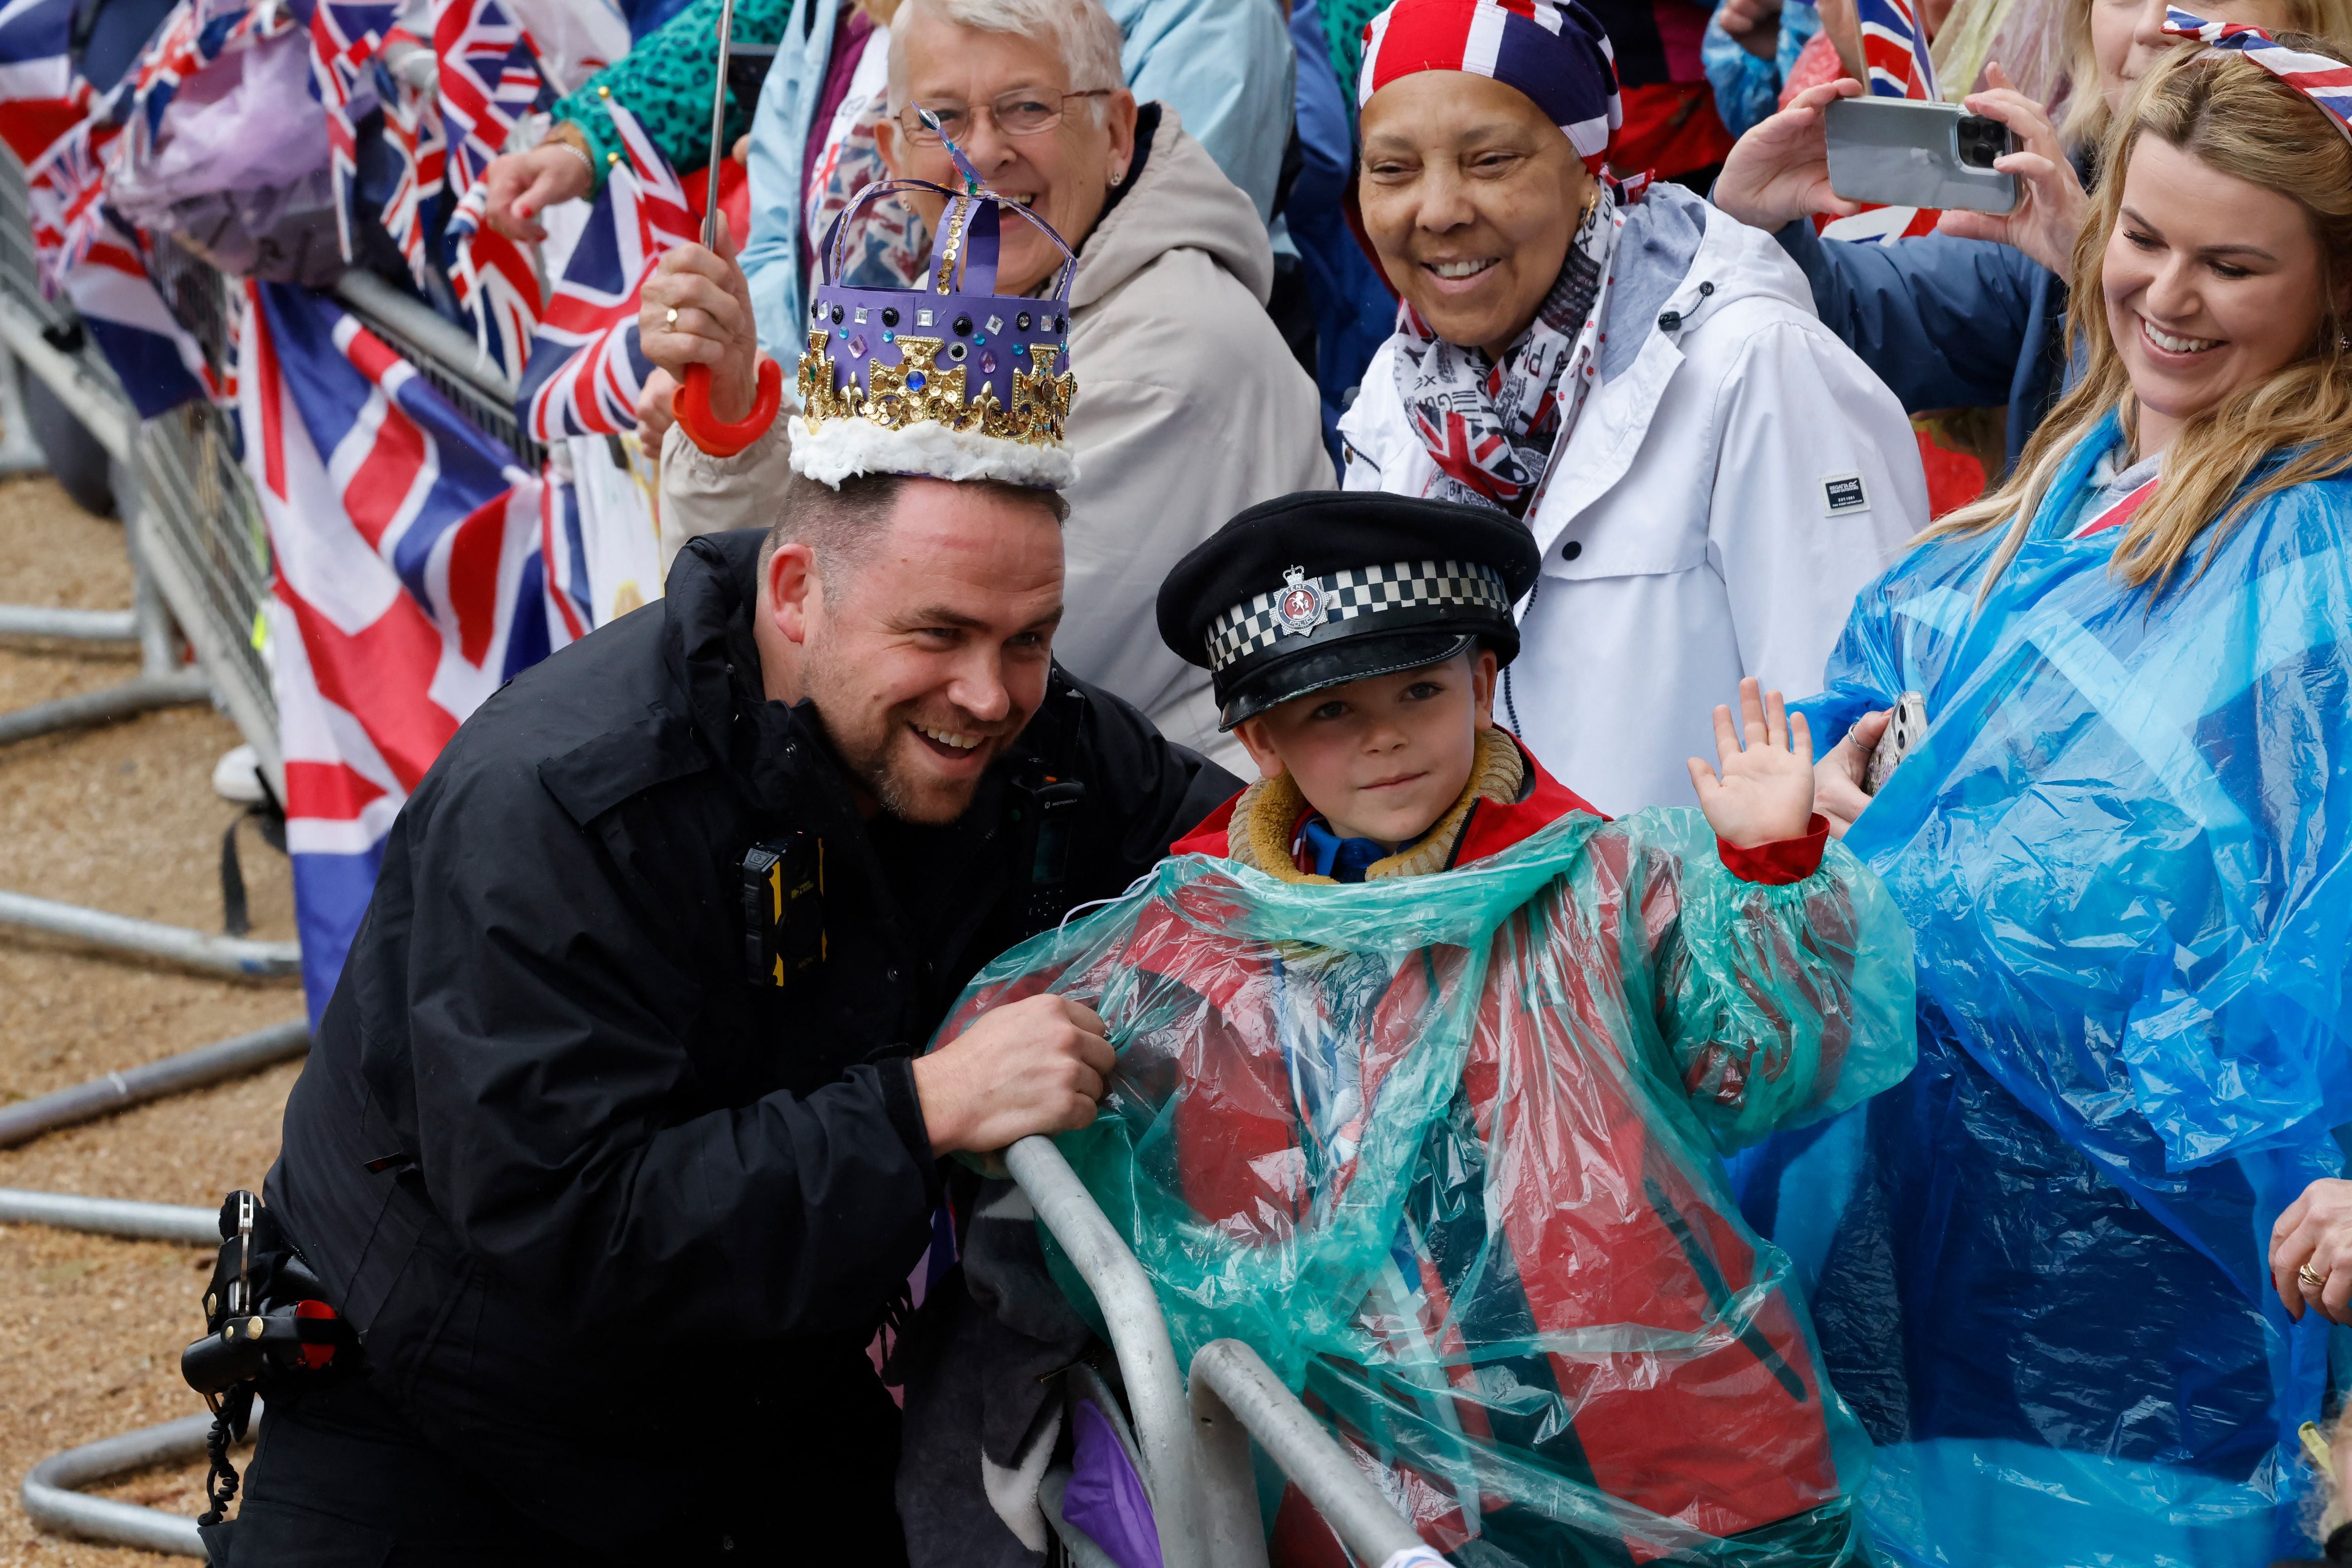 A police officer poses with a young member of the public ahead of the 'King's Procession', a two kilometer stretch from Buckingham Palace to Westminster Abbey, as they await Britain's King Charles III and the Queen Consort Camilla from Great Britain pass into the Diamond State.  (Photo by CARLOS JASSO / AFP)